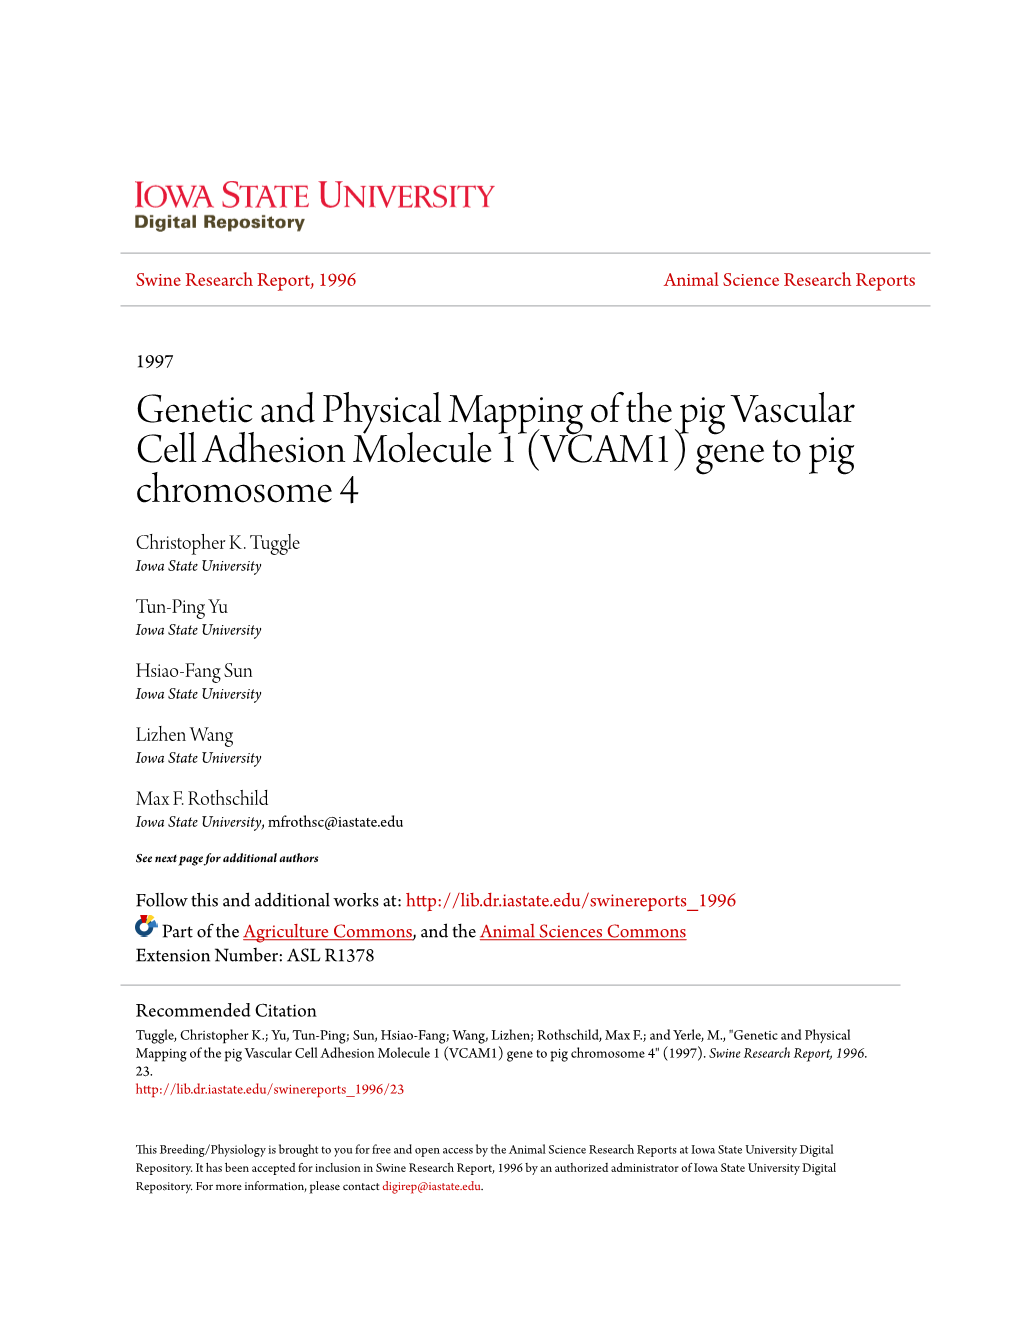 Genetic and Physical Mapping of the Pig Vascular Cell Adhesion Molecule 1 (VCAM1) Gene to Pig Chromosome 4 Christopher K